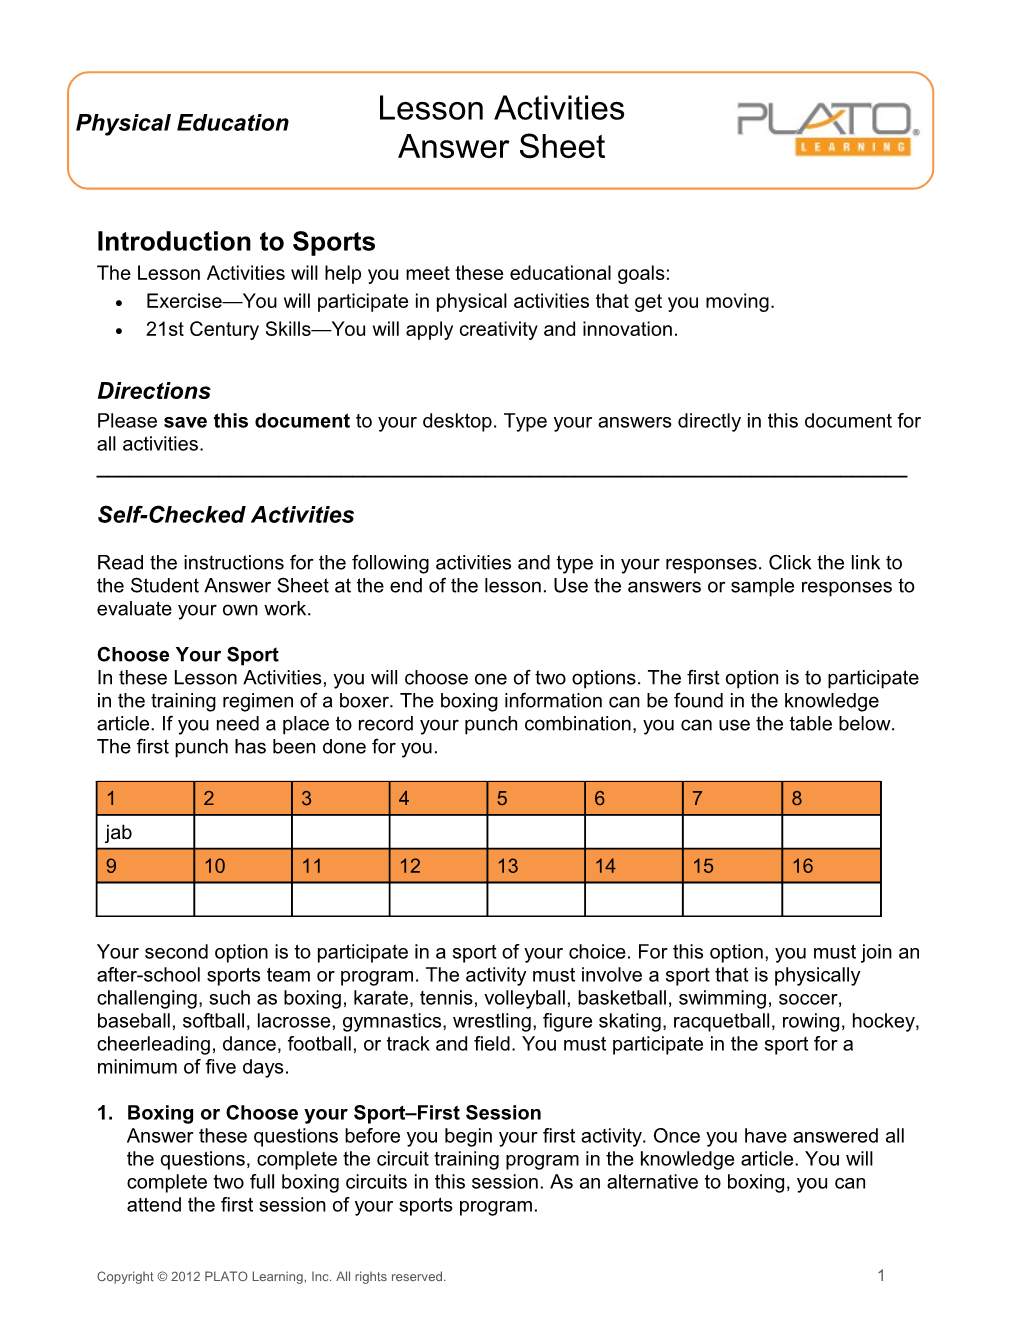 Introduction to Sports